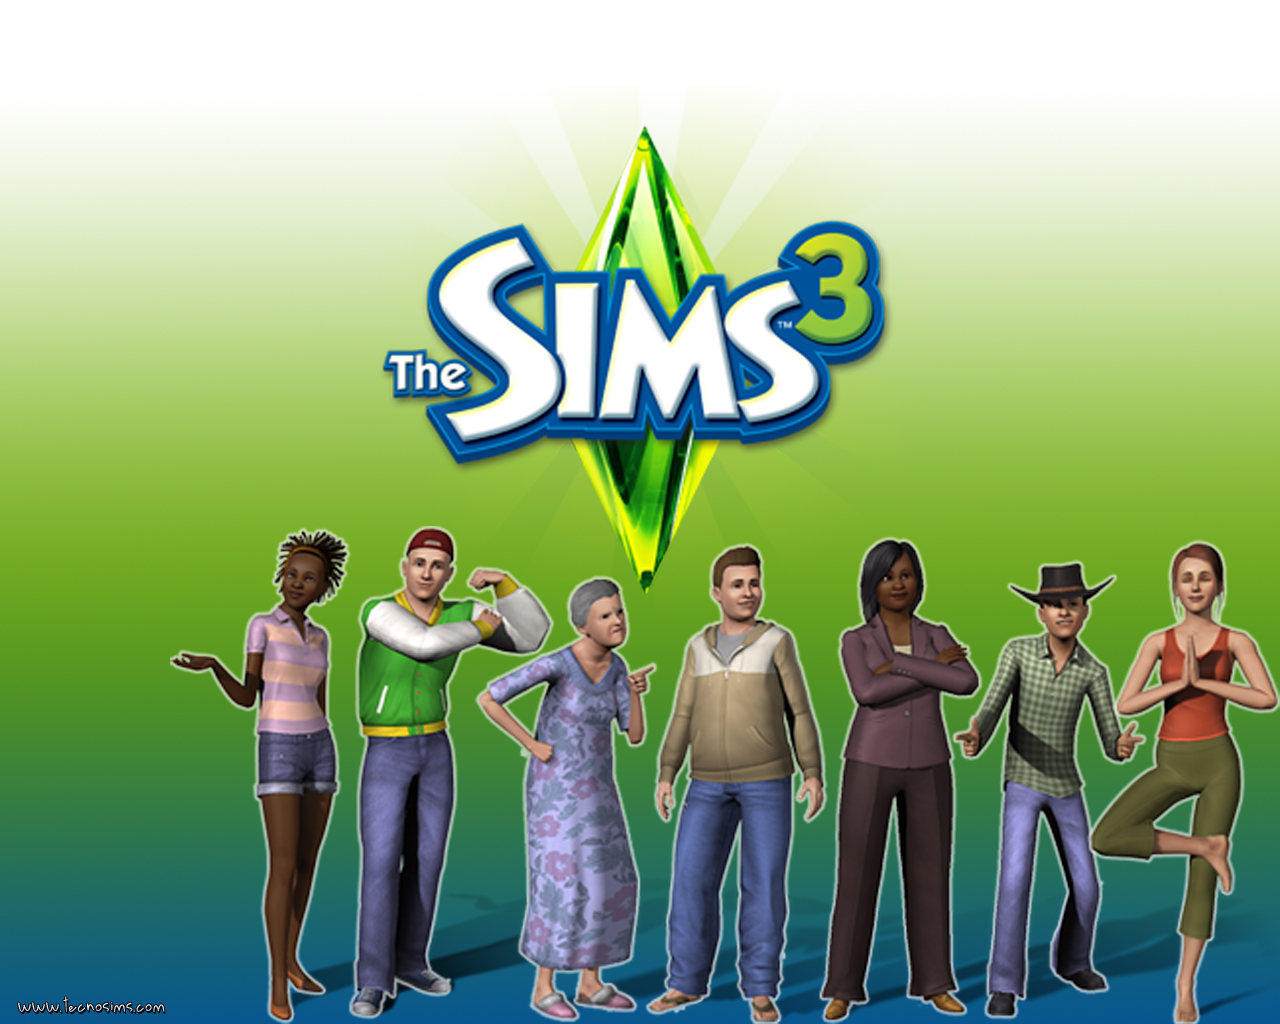 The Sims Wallpaper Top Windows Themes